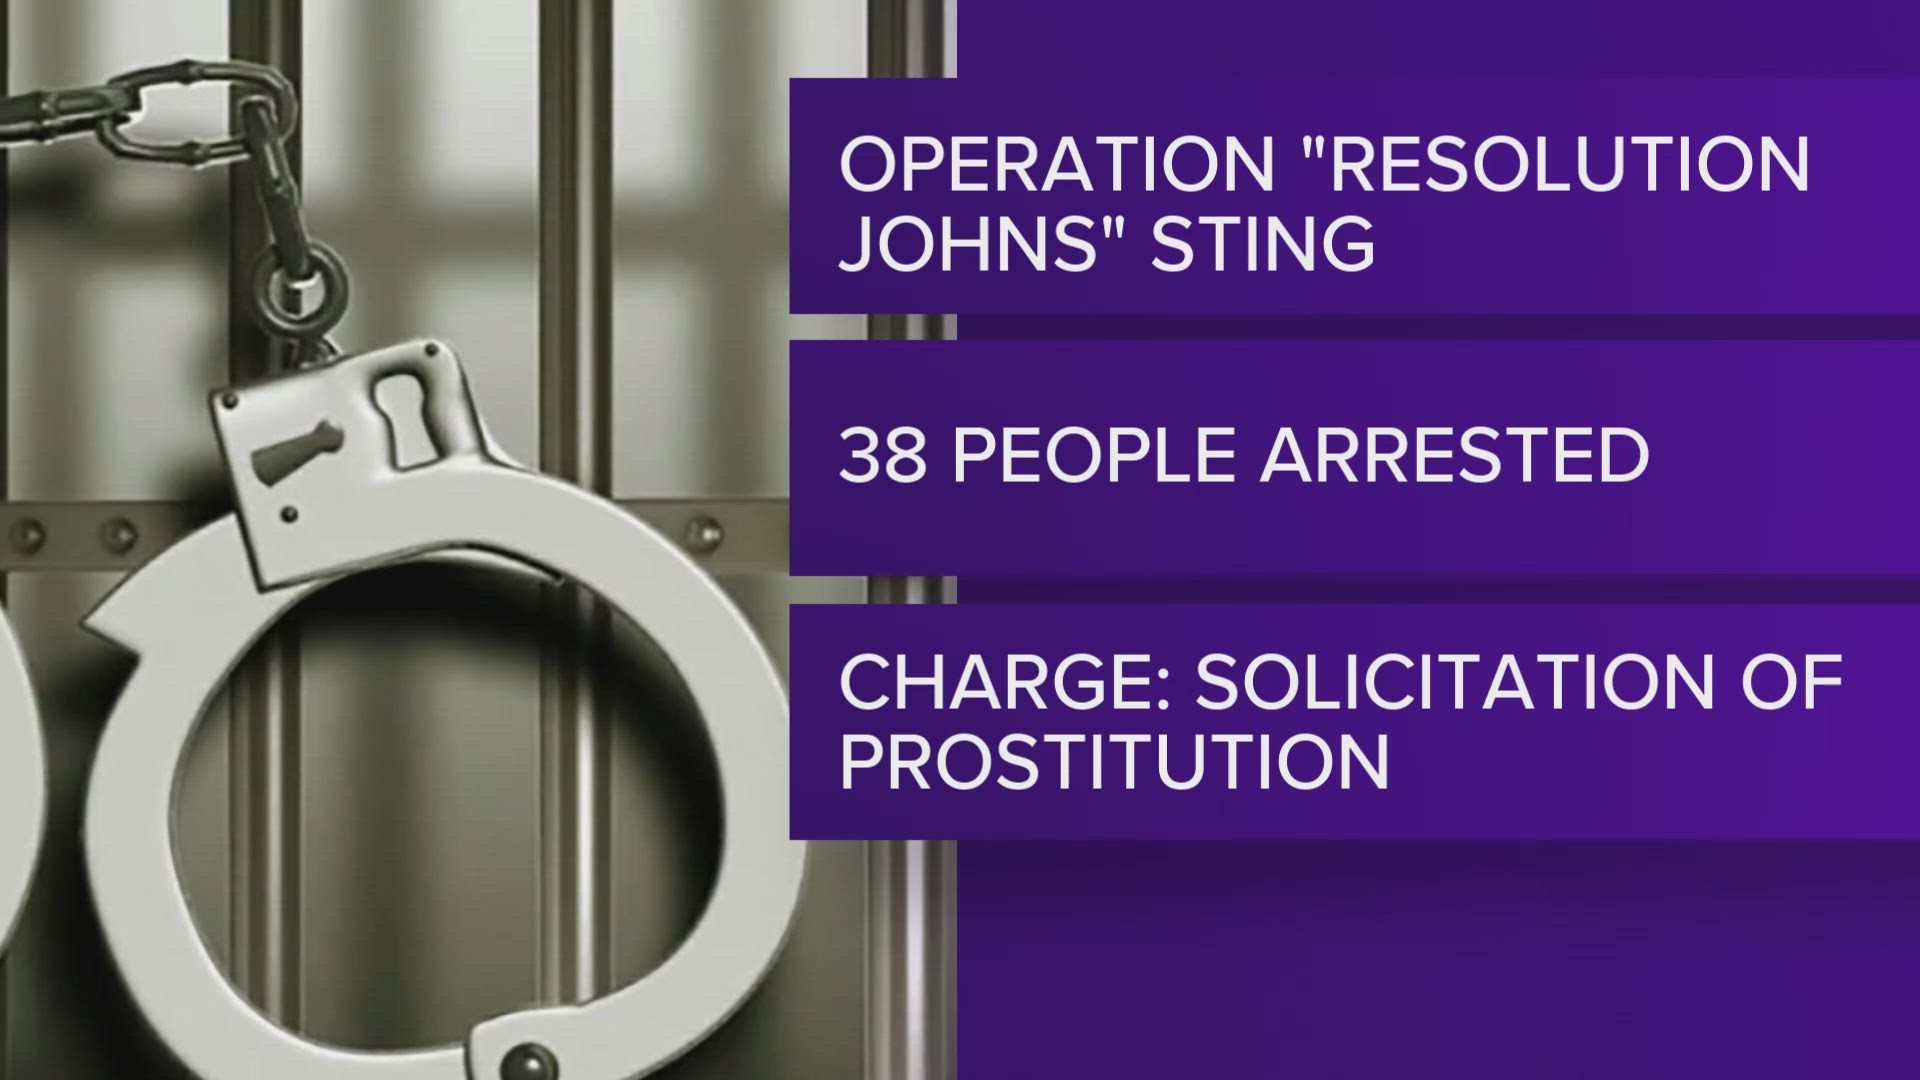 The four-day "John sting" resulted in the 38 people to be arrested for solicitation of prostitution.